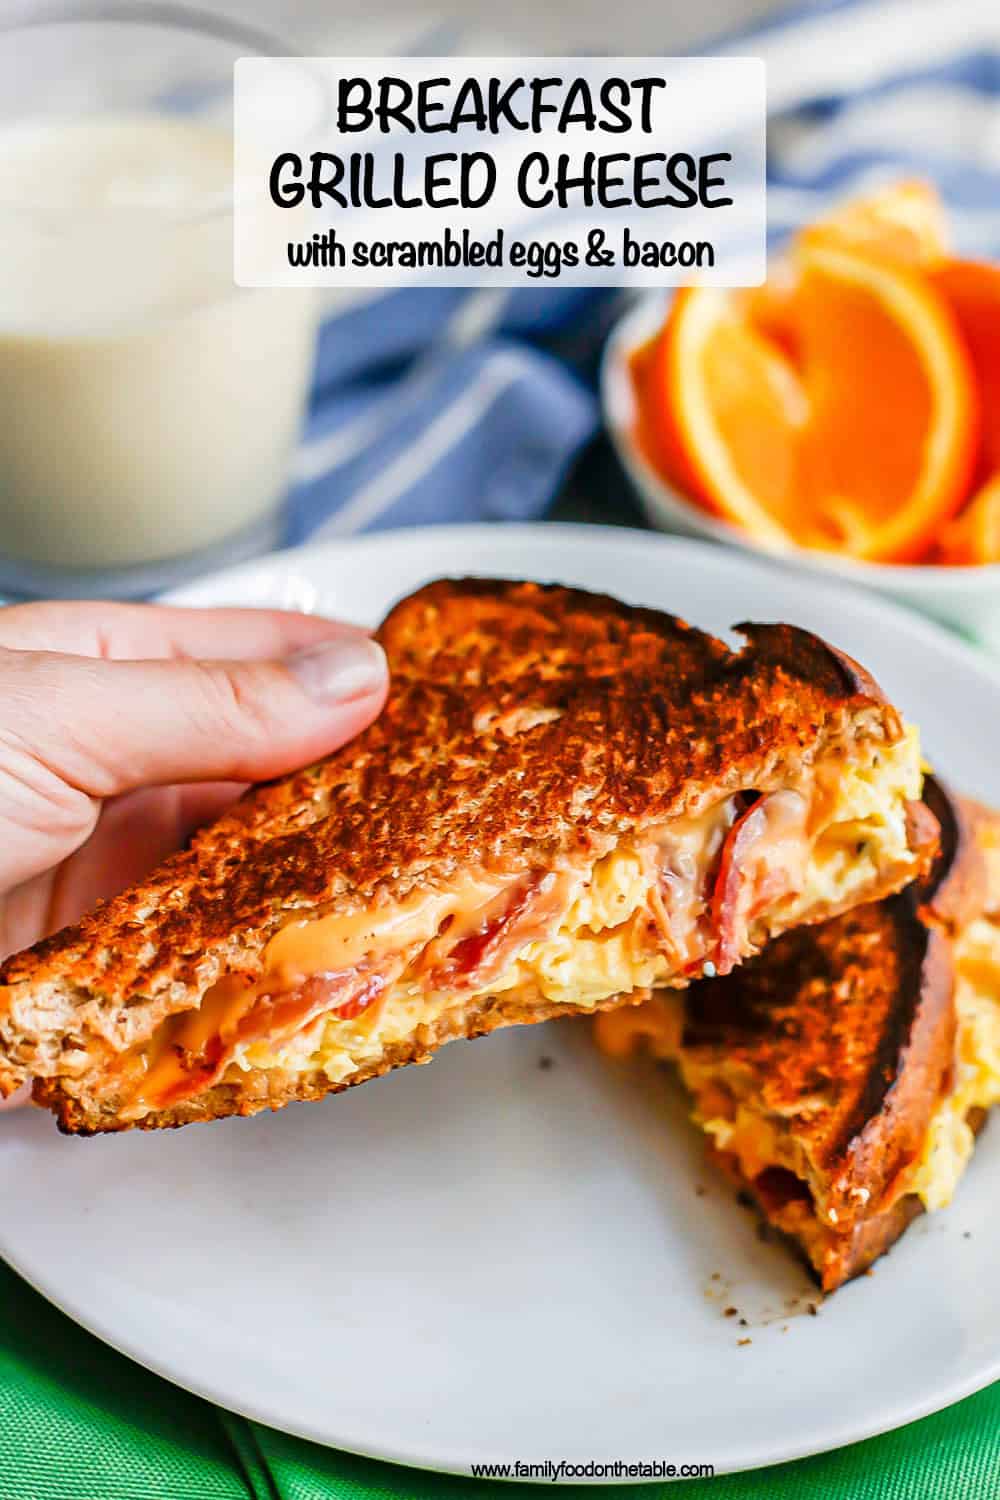 A hand holding up a half of a grilled cheese with bacon and scrambled eggs from a white plate with a text overlay on the photo